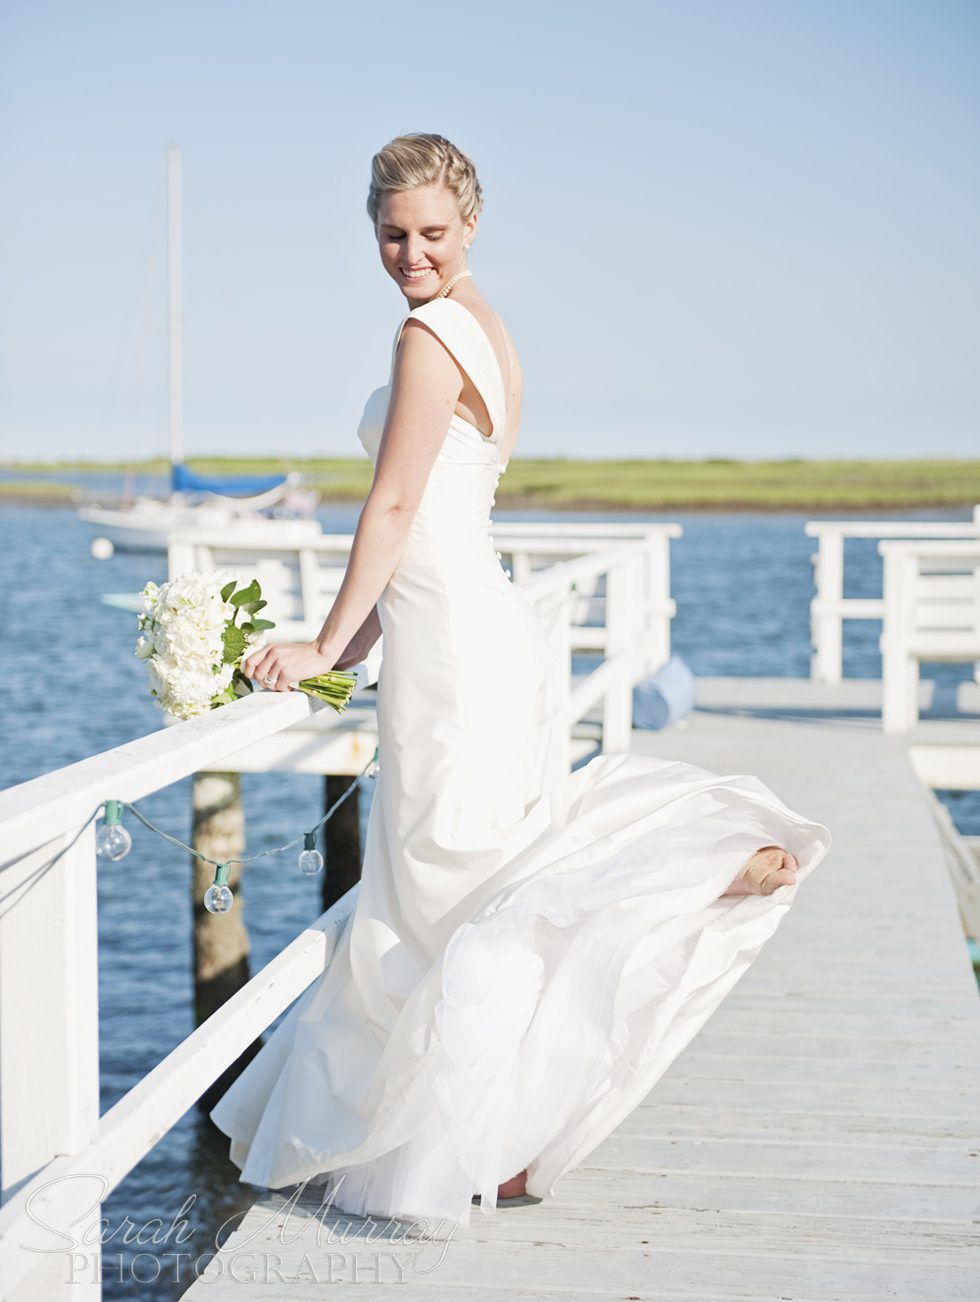 Private Home, South Yarmouth Wedding - Sarah Murray Photography